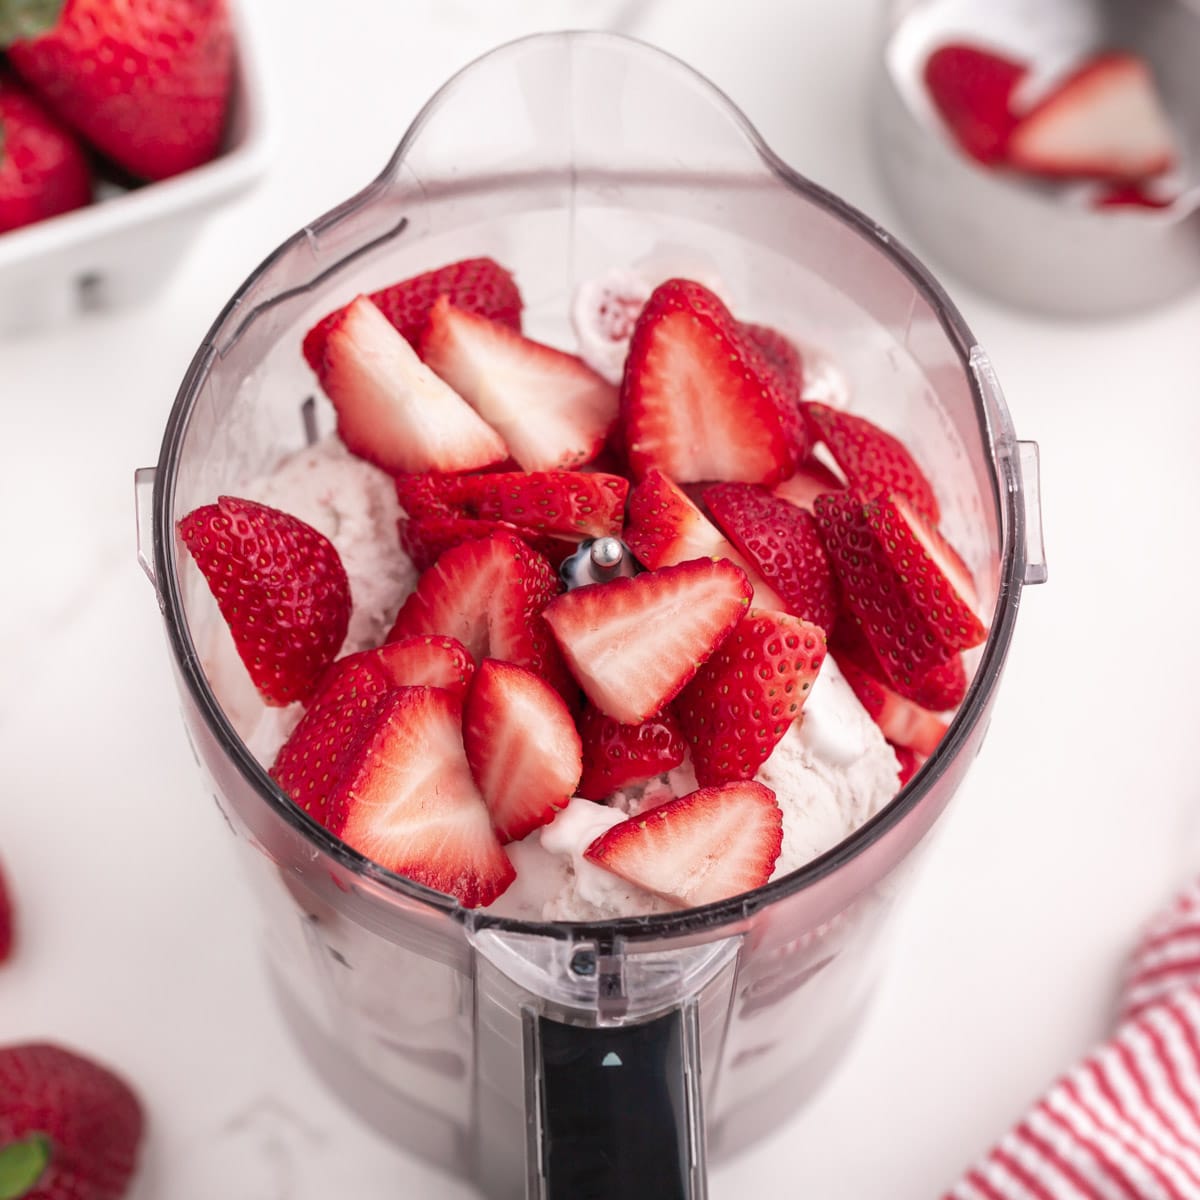 ice cream and strawberries in a blender